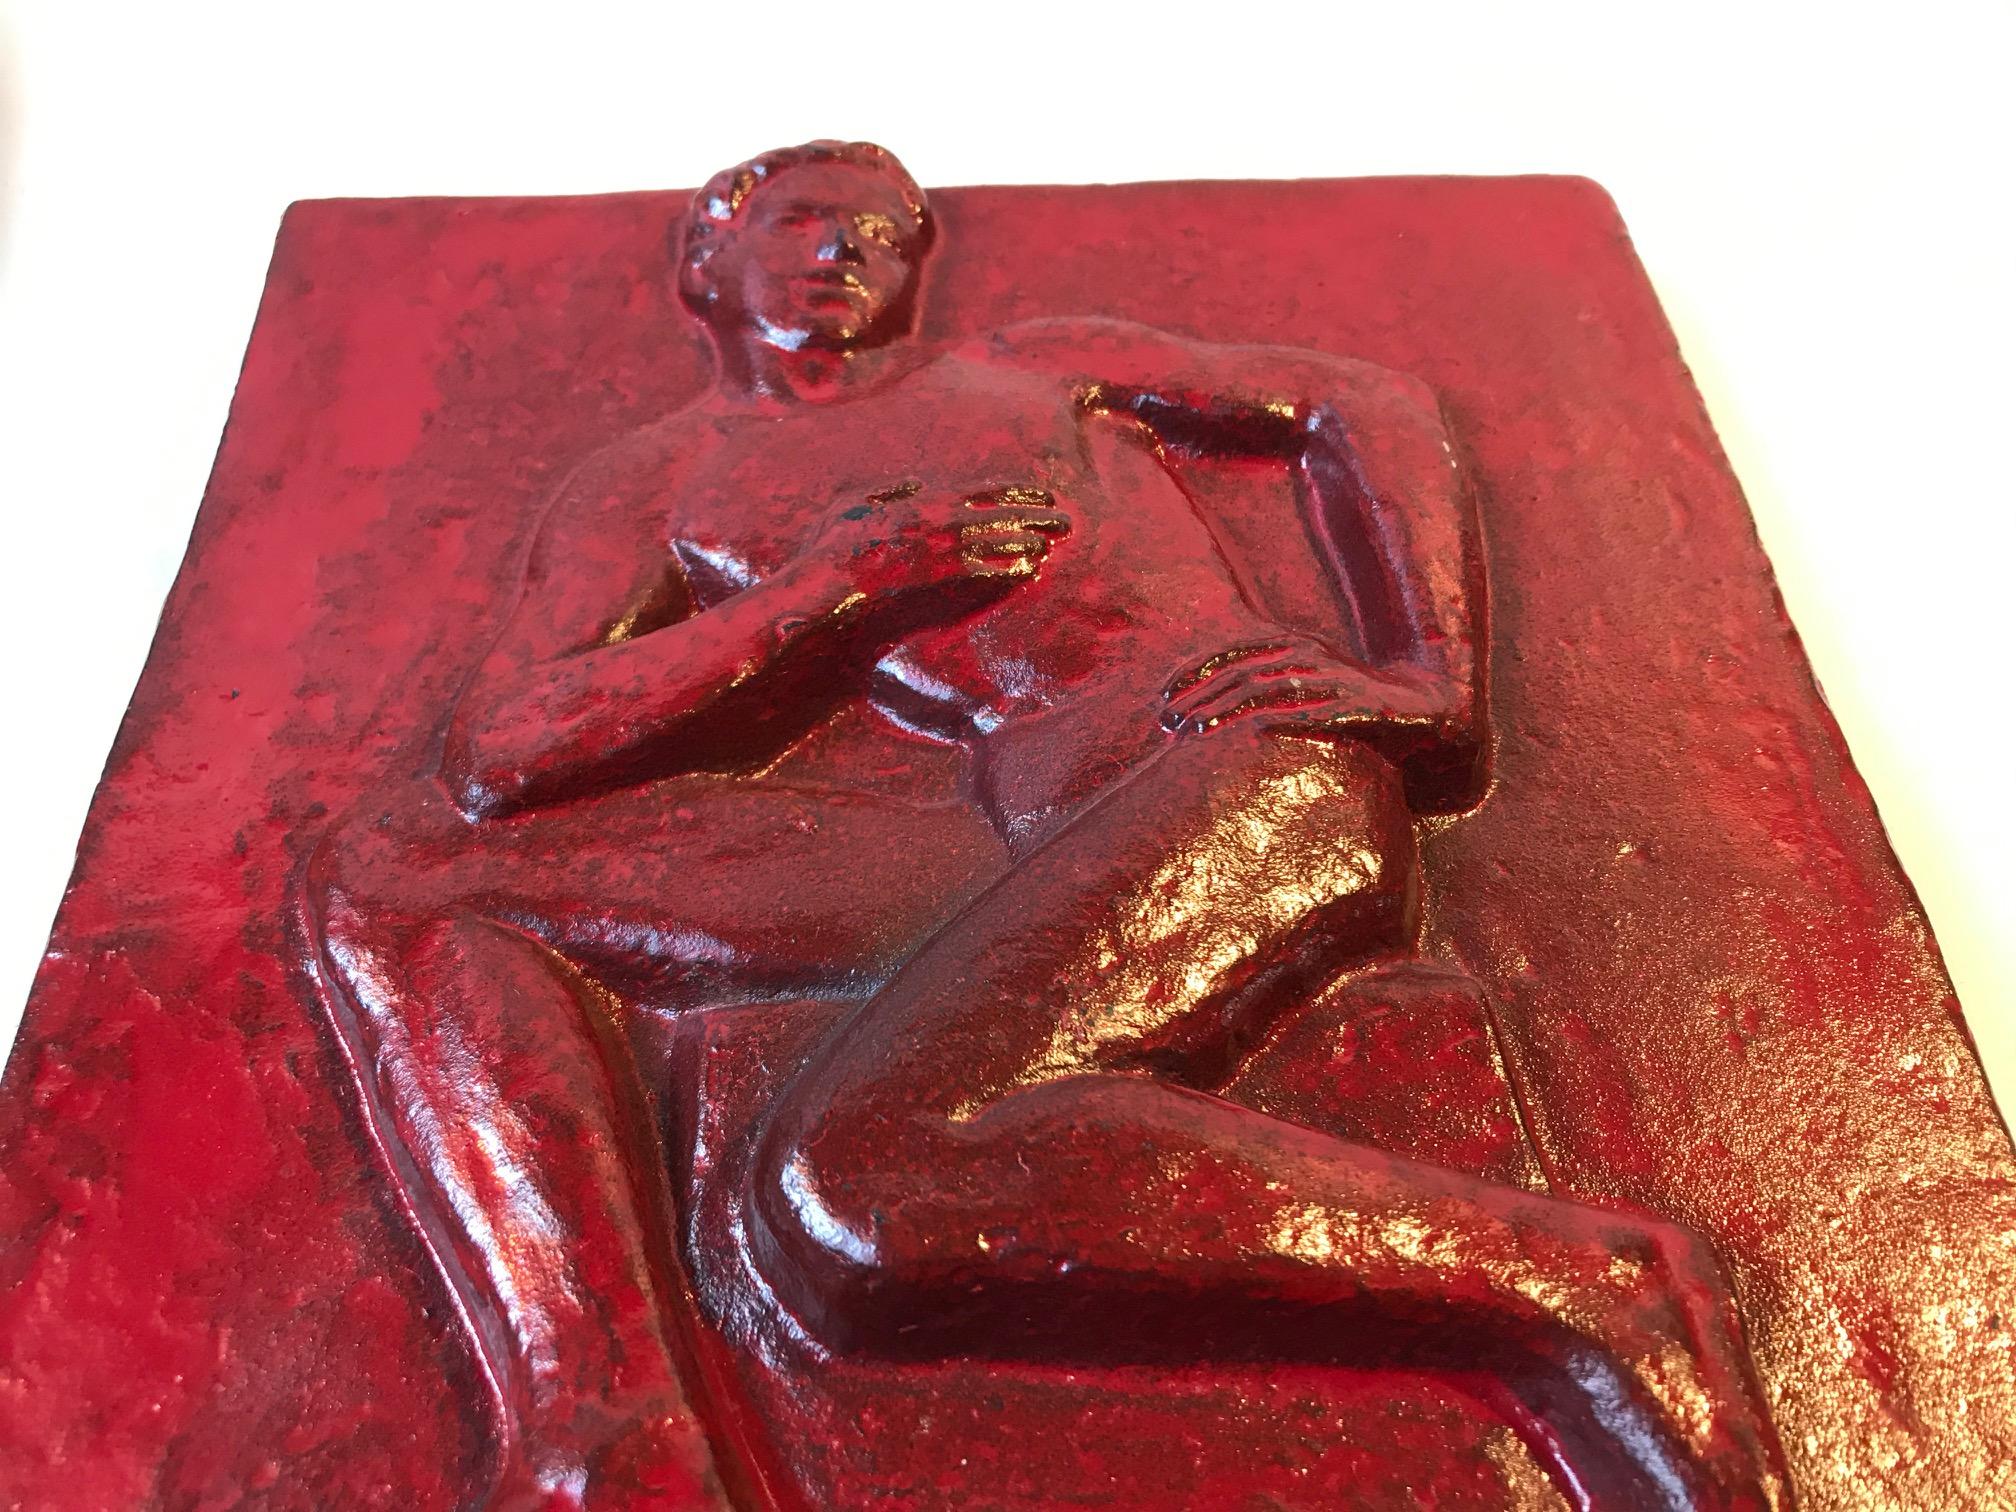 Modern interpretation of Classical Greek sculpting. This piece executed in red enameled cast iron was made by the danish artist and sculptor Jørgen Gudmundsen-Holmgreen and serialized through H. Rasmussen & Co Iron Foundry in Odense, Denmark. This